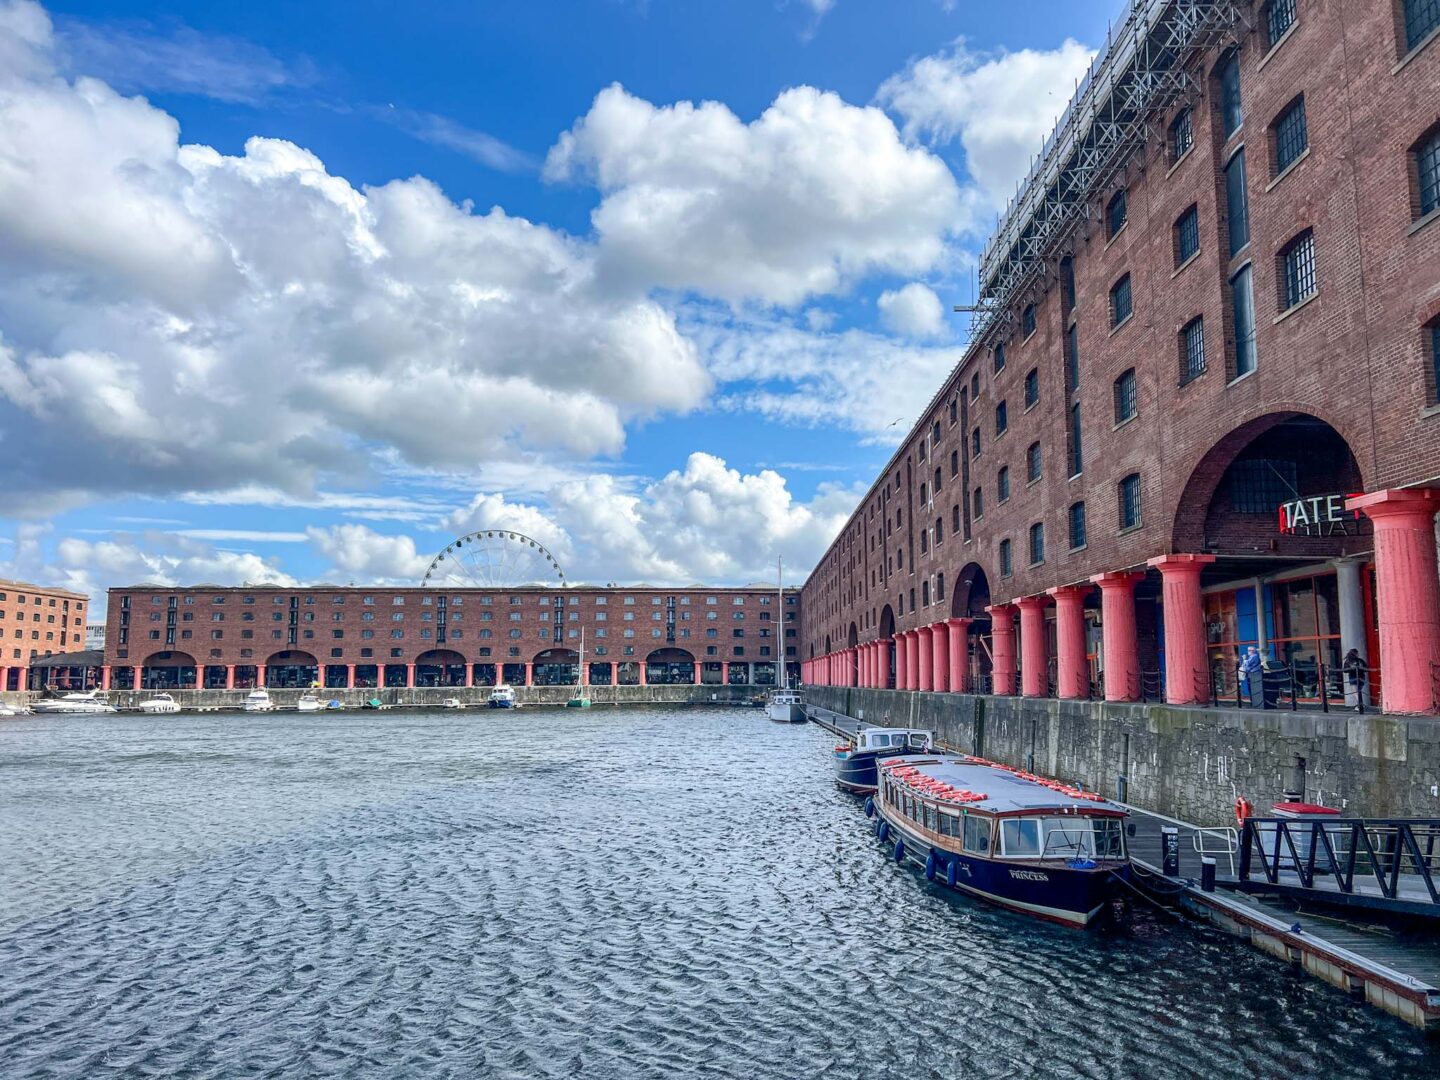 One day in Liverpool, Royal Albert Docks